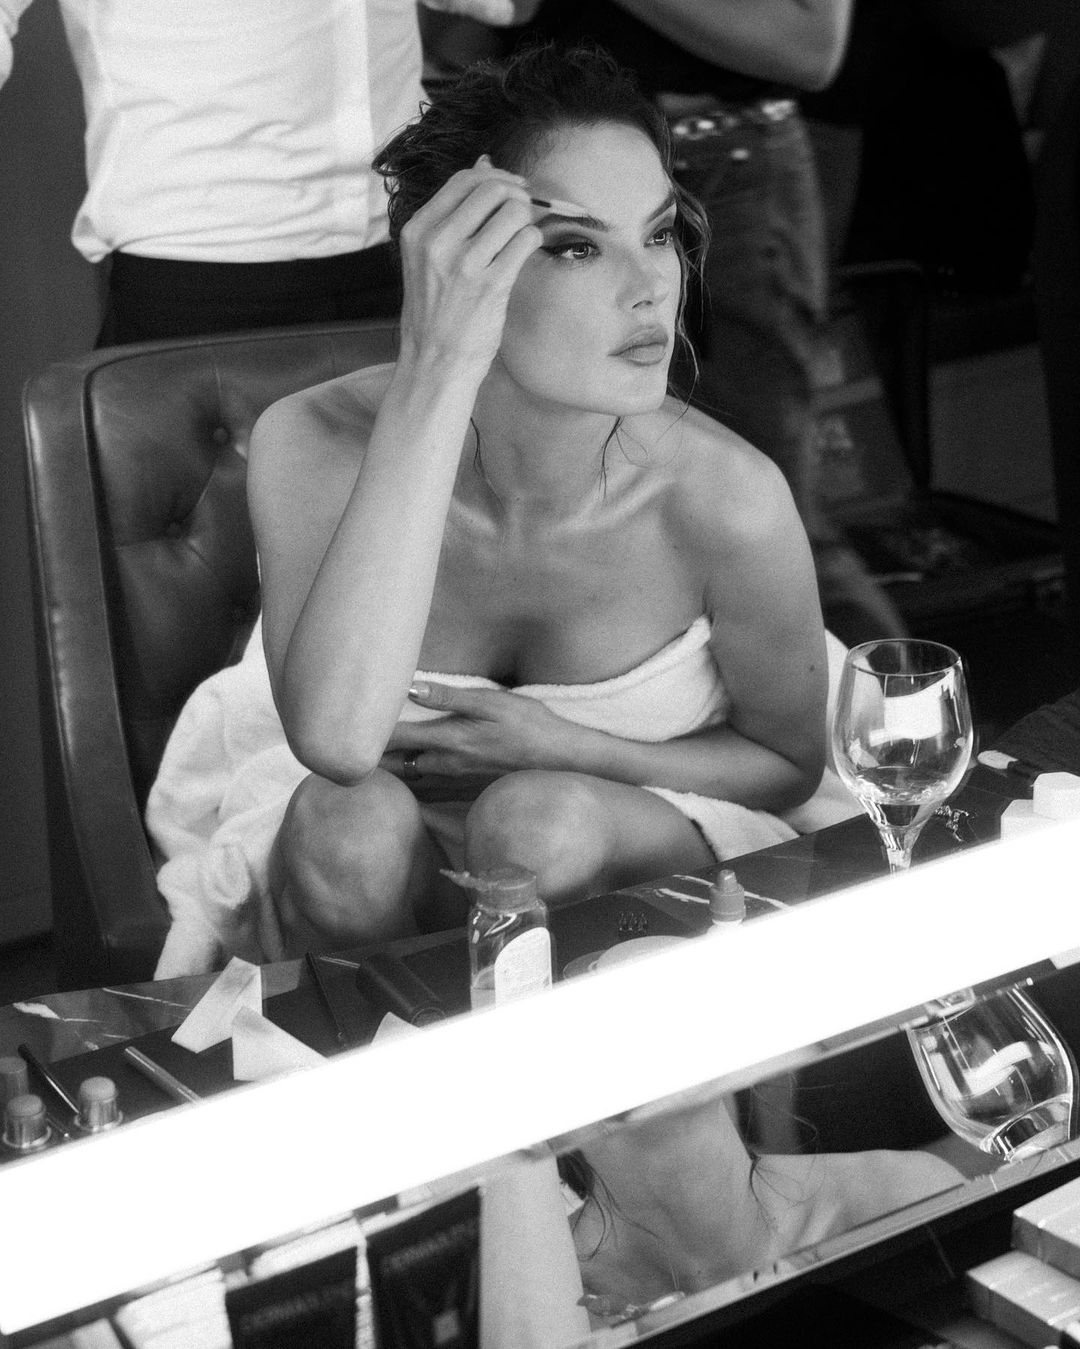 Alessandra Ambrosio is Getting Cheeky in The Changing Room! - Photo 10